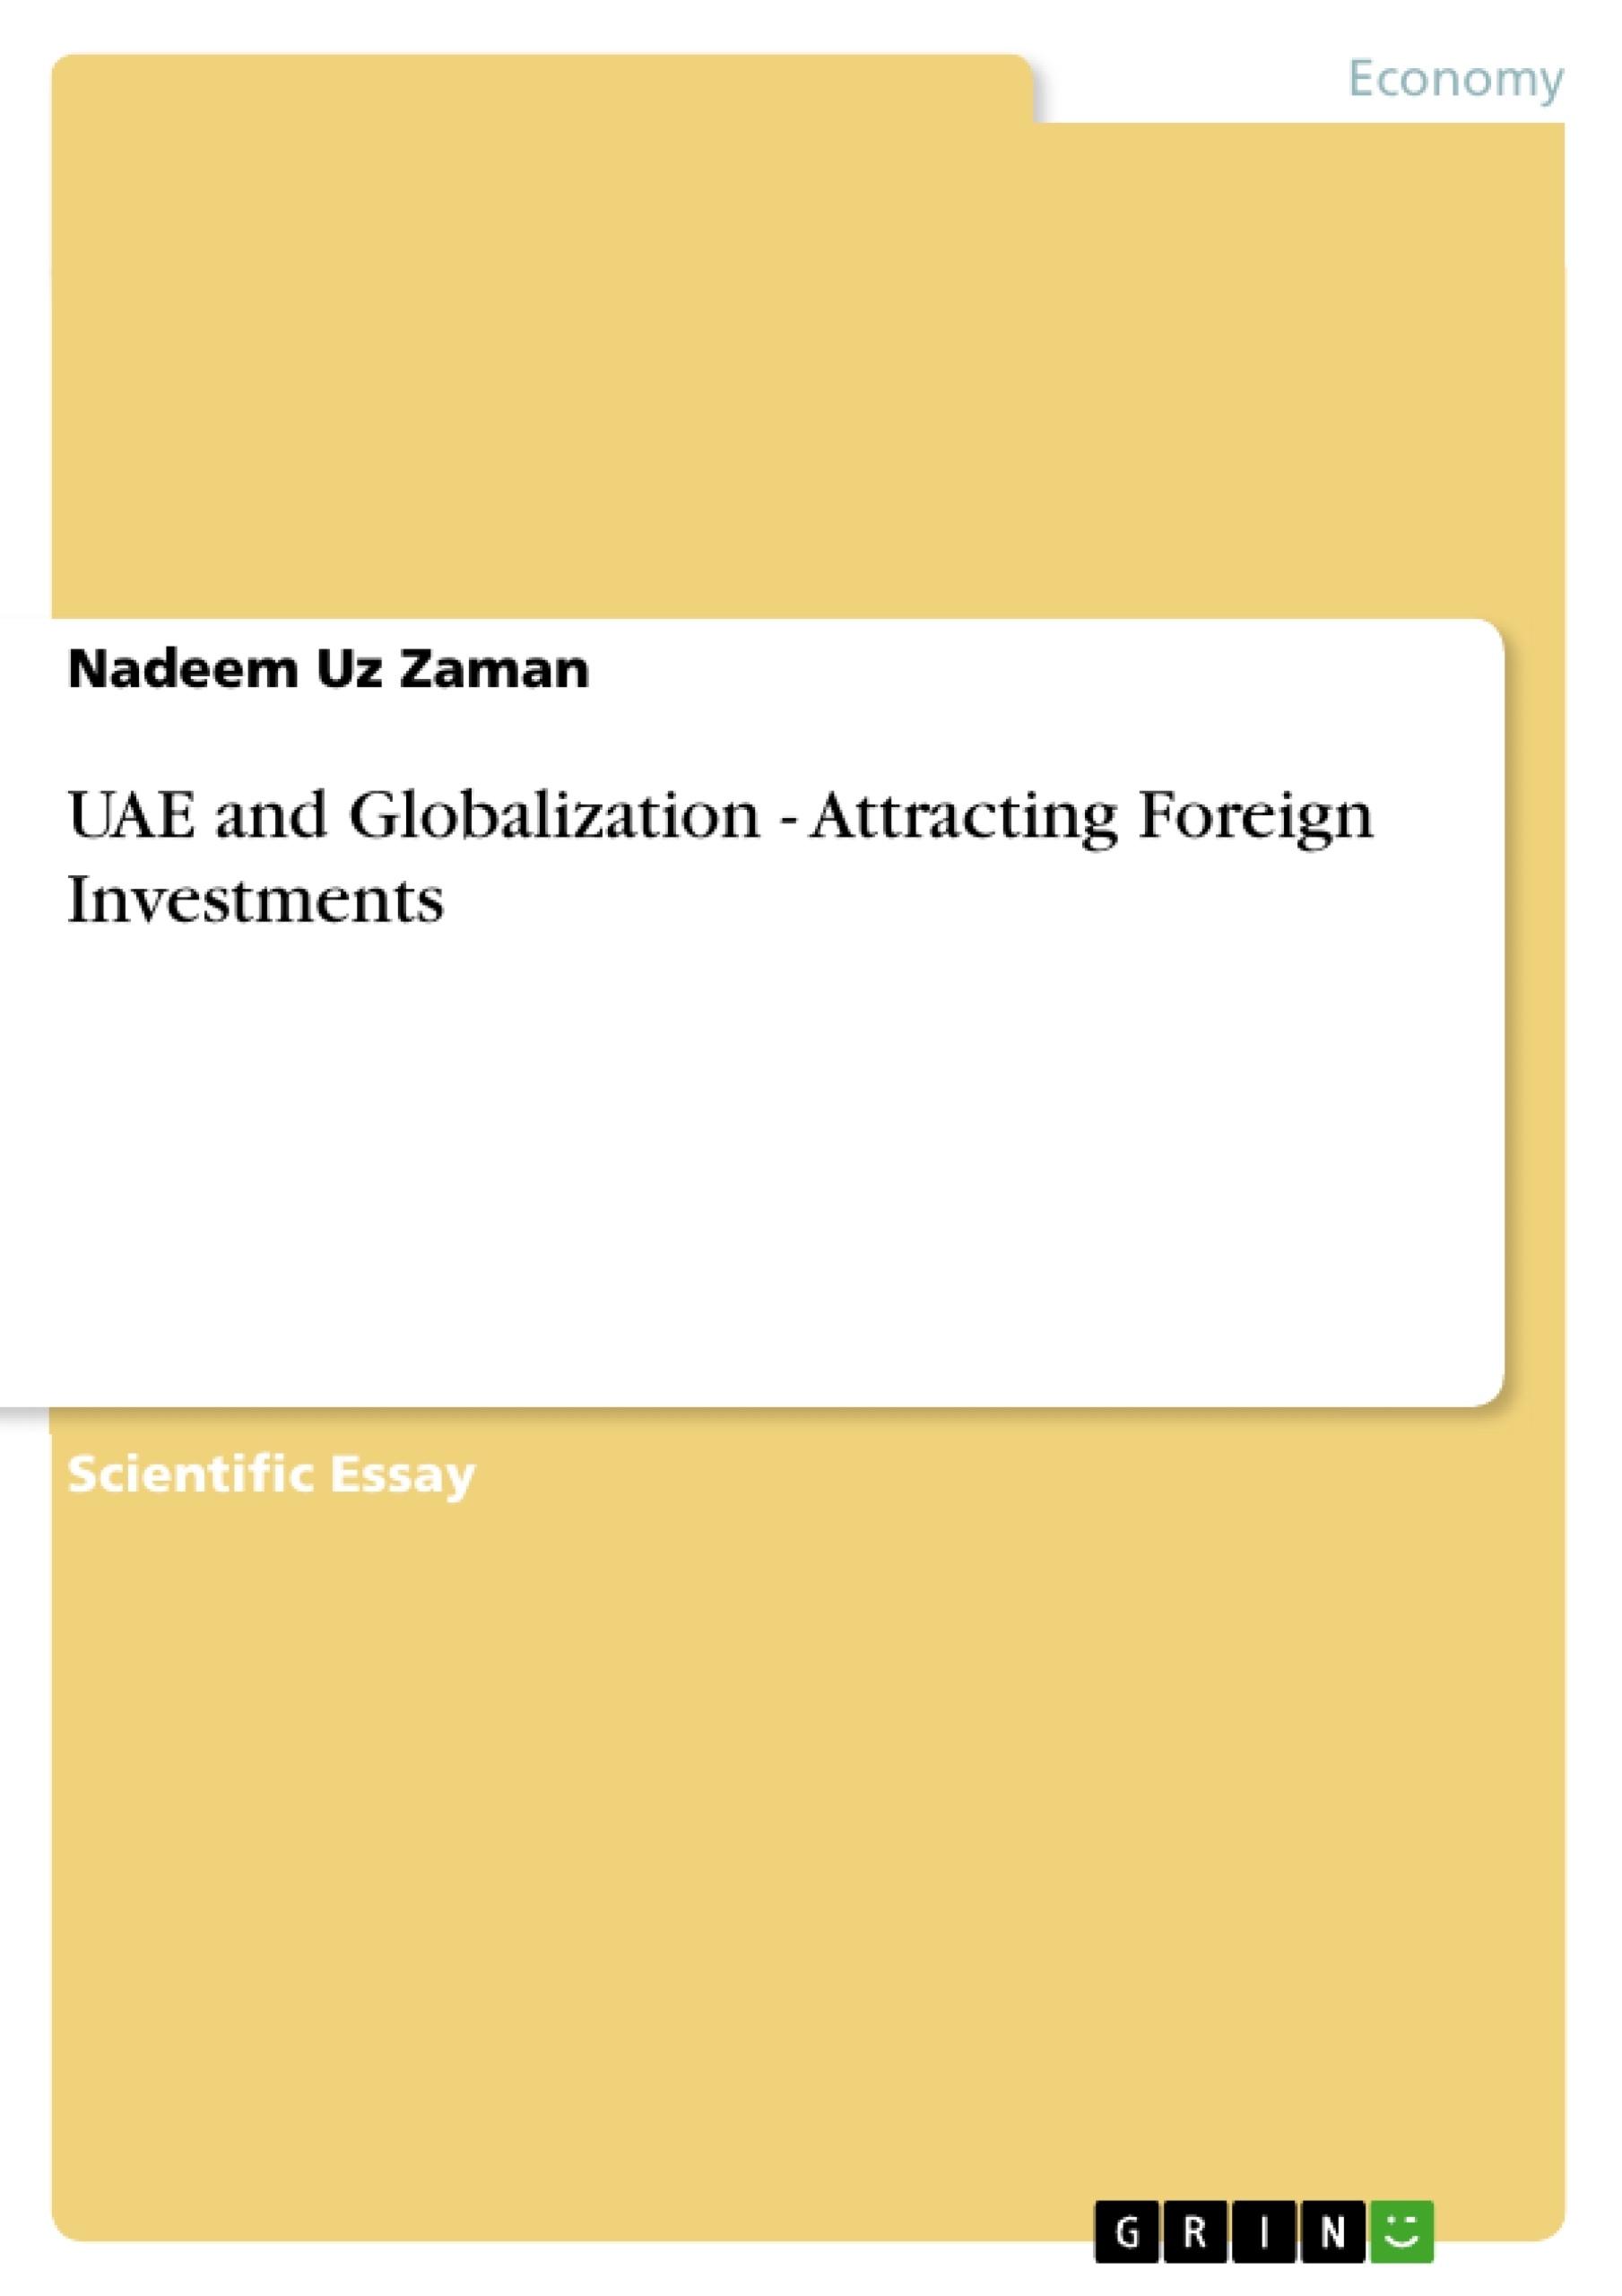 Title: UAE and Globalization - Attracting Foreign Investments